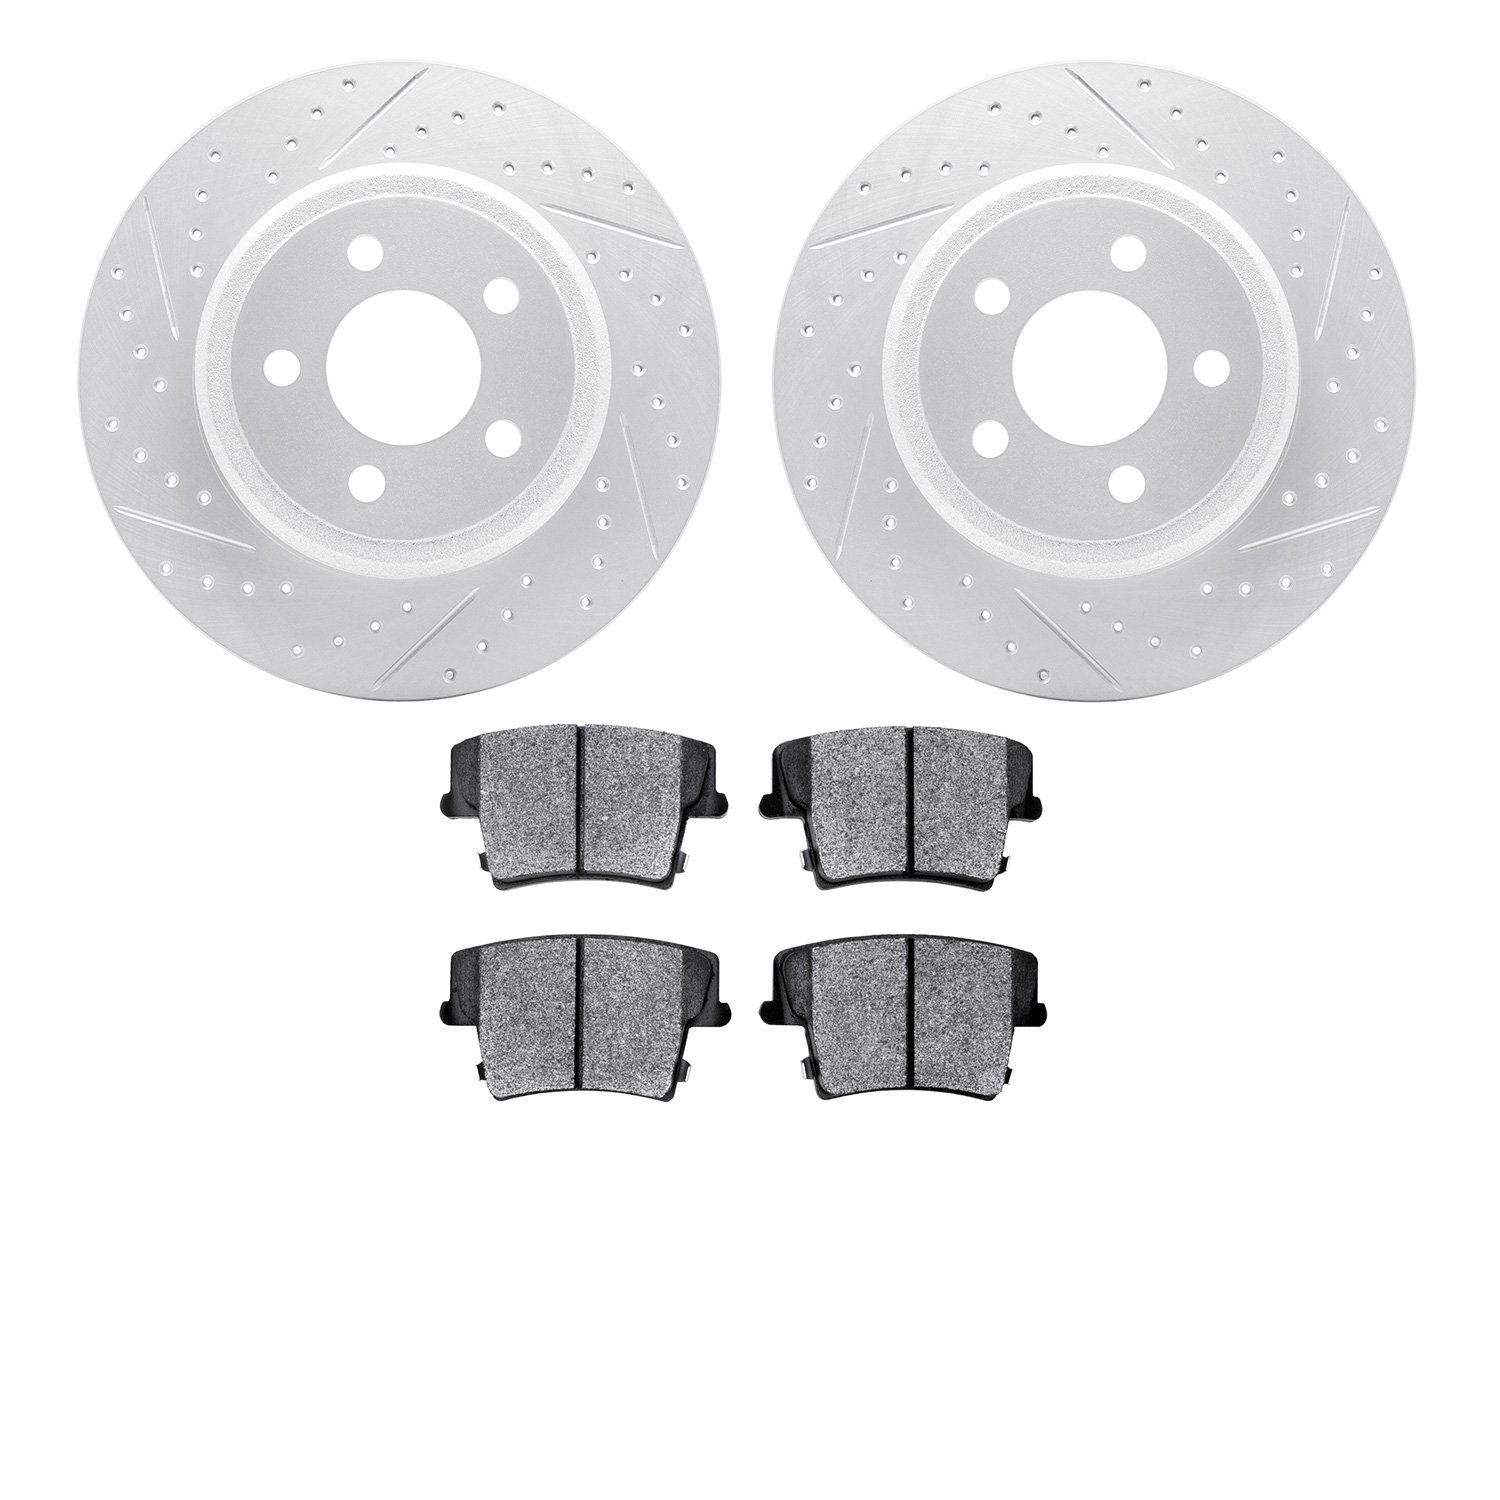 2502-39009 Geoperformance Drilled/Slotted Rotors w/5000 Advanced Brake Pads Kit, Fits Select Mopar, Position: Rear